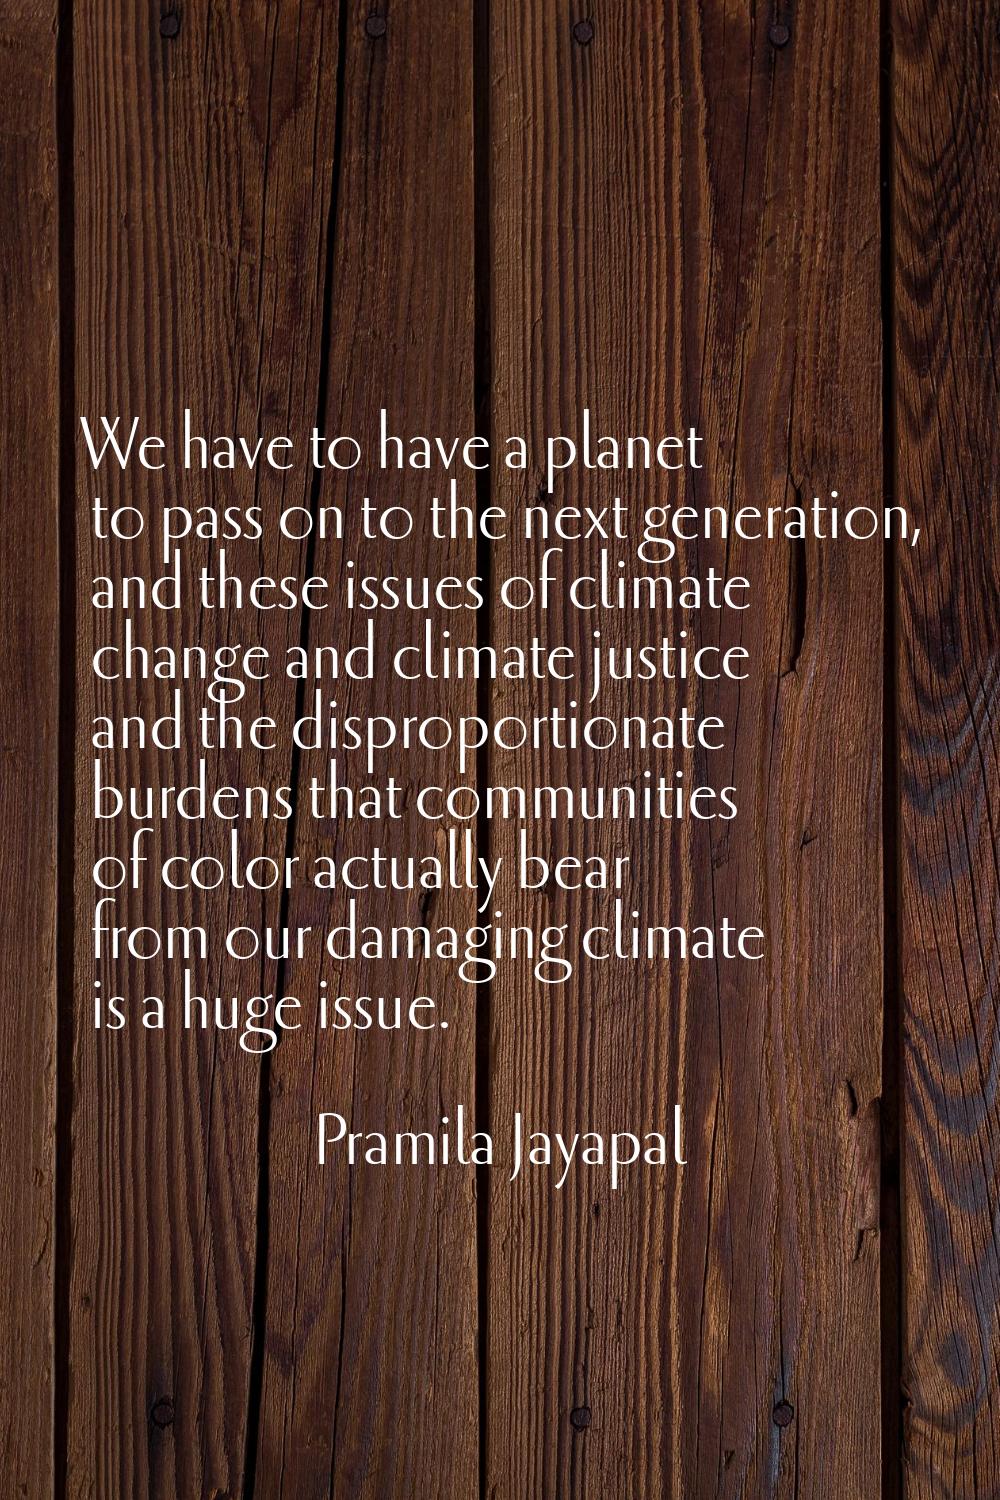 We have to have a planet to pass on to the next generation, and these issues of climate change and 